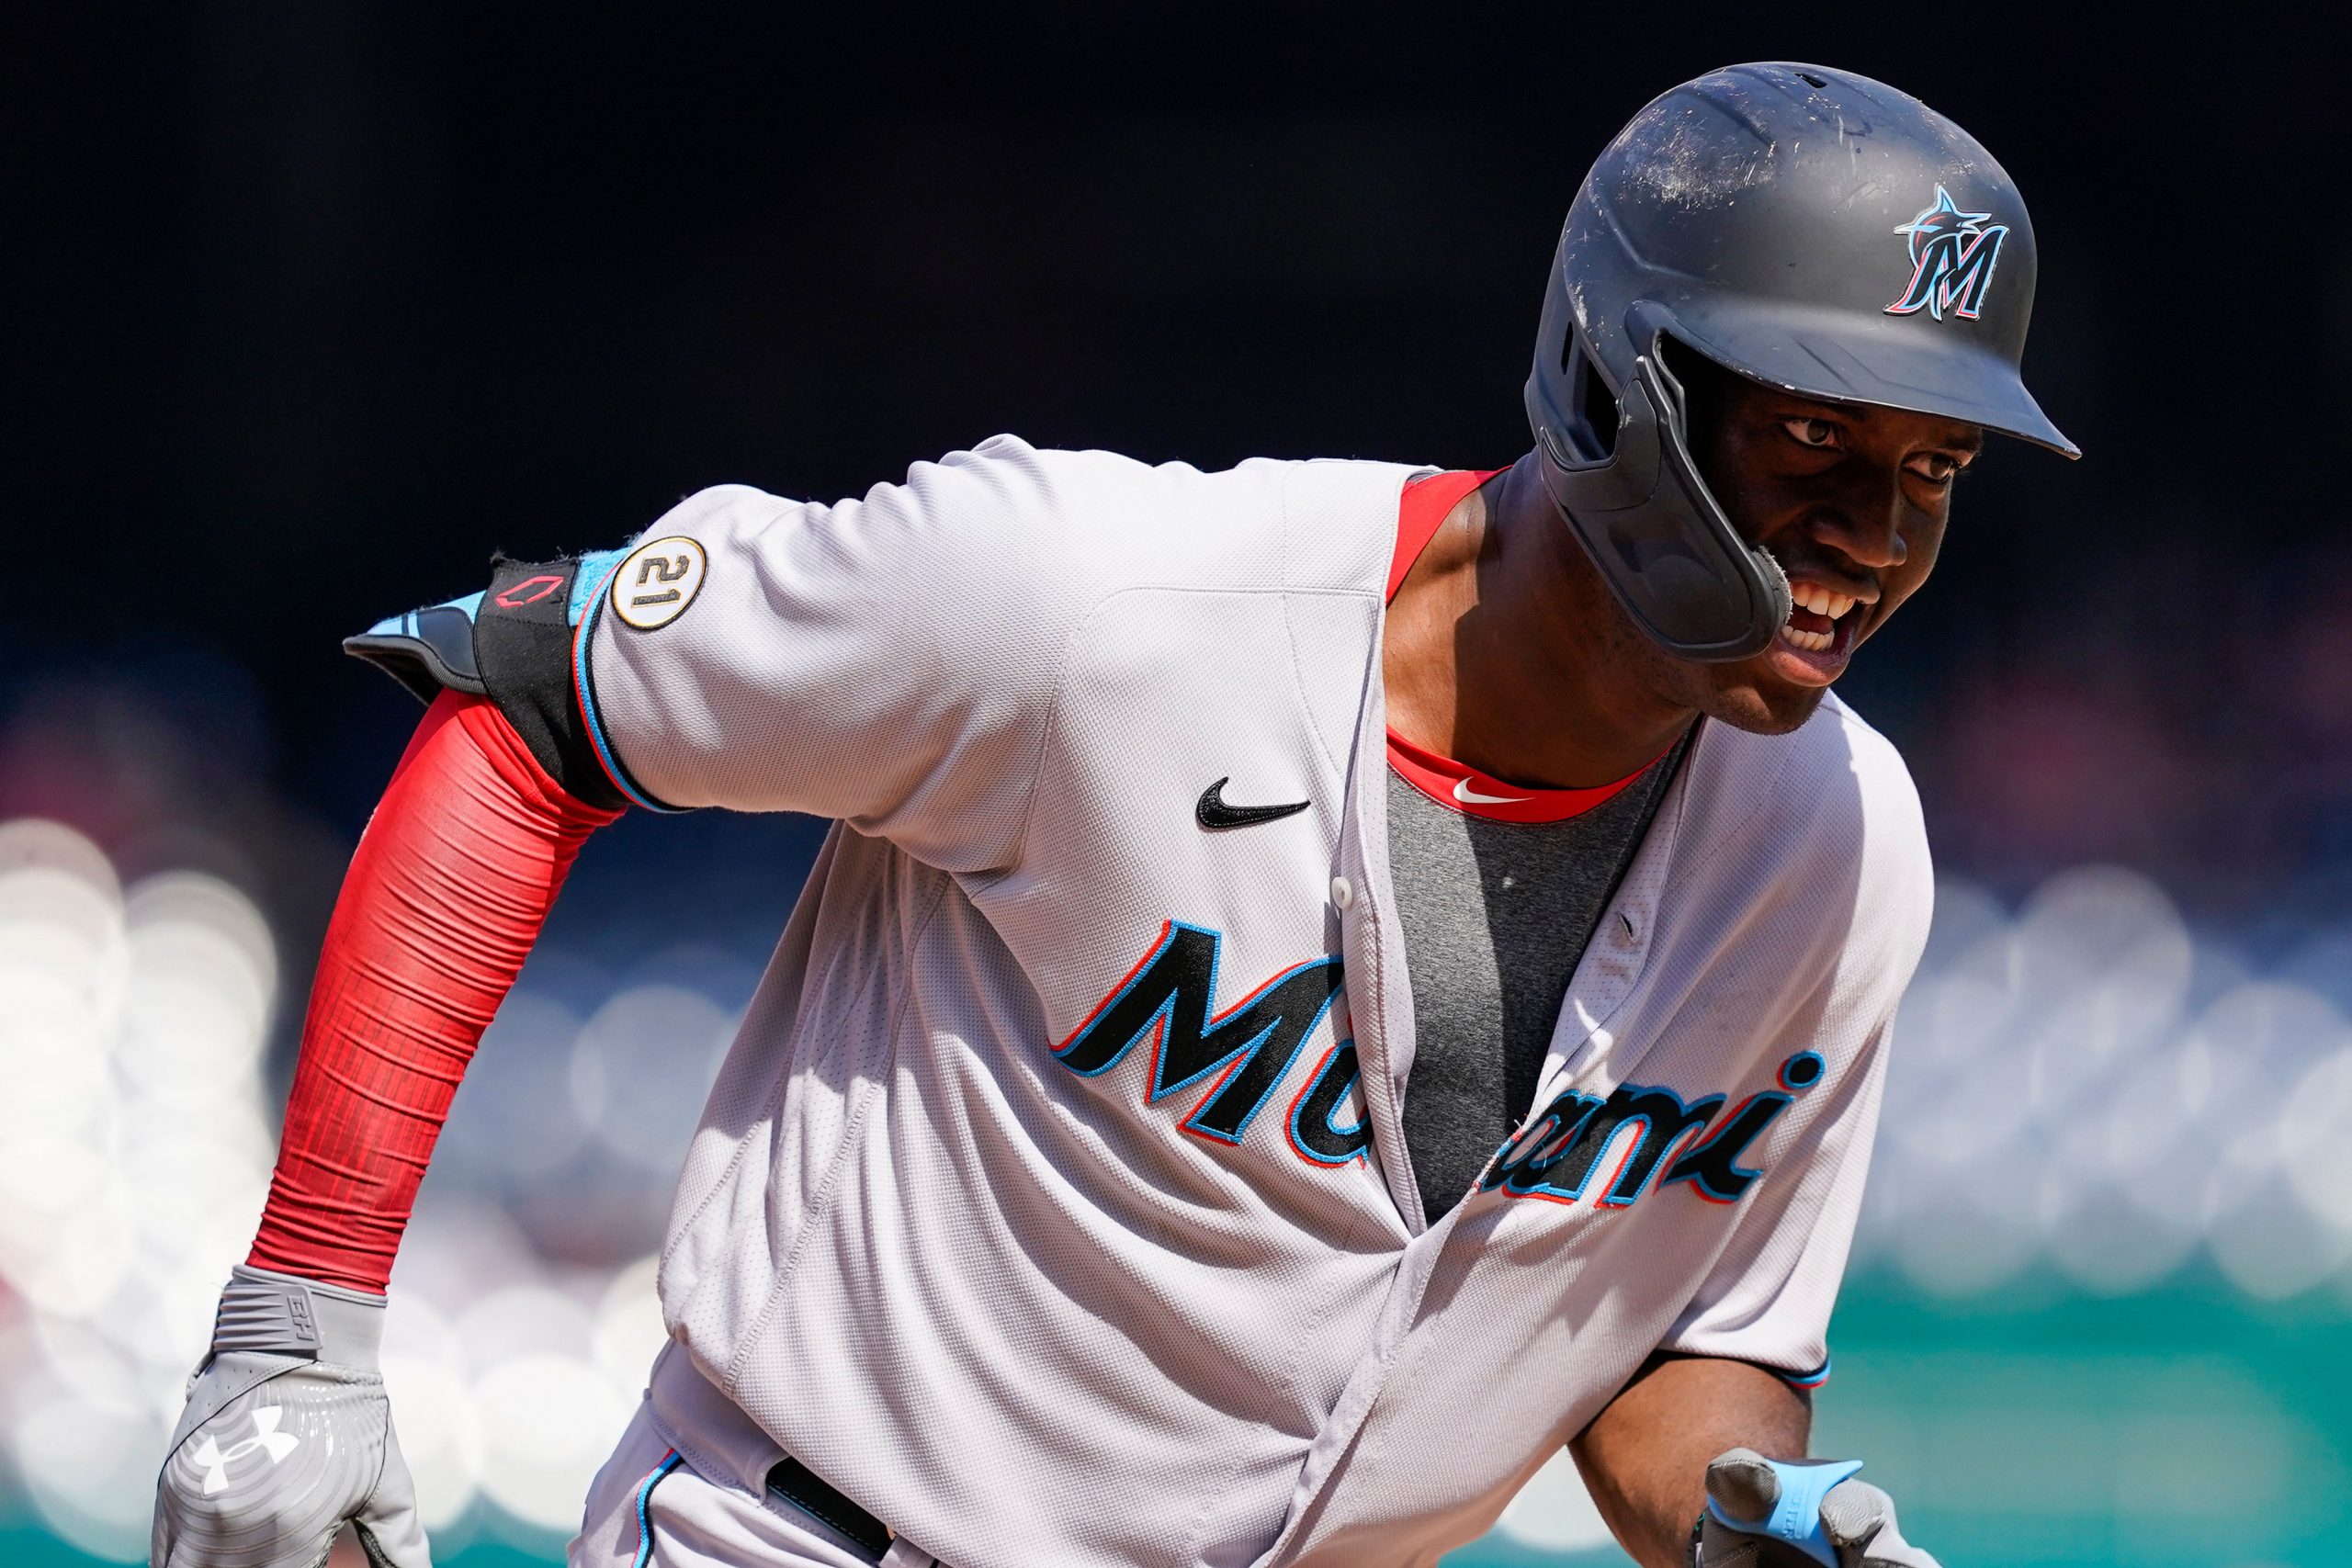 MLB: Sanchez’s two homers power Marlins’s 8-6 win over Nationals